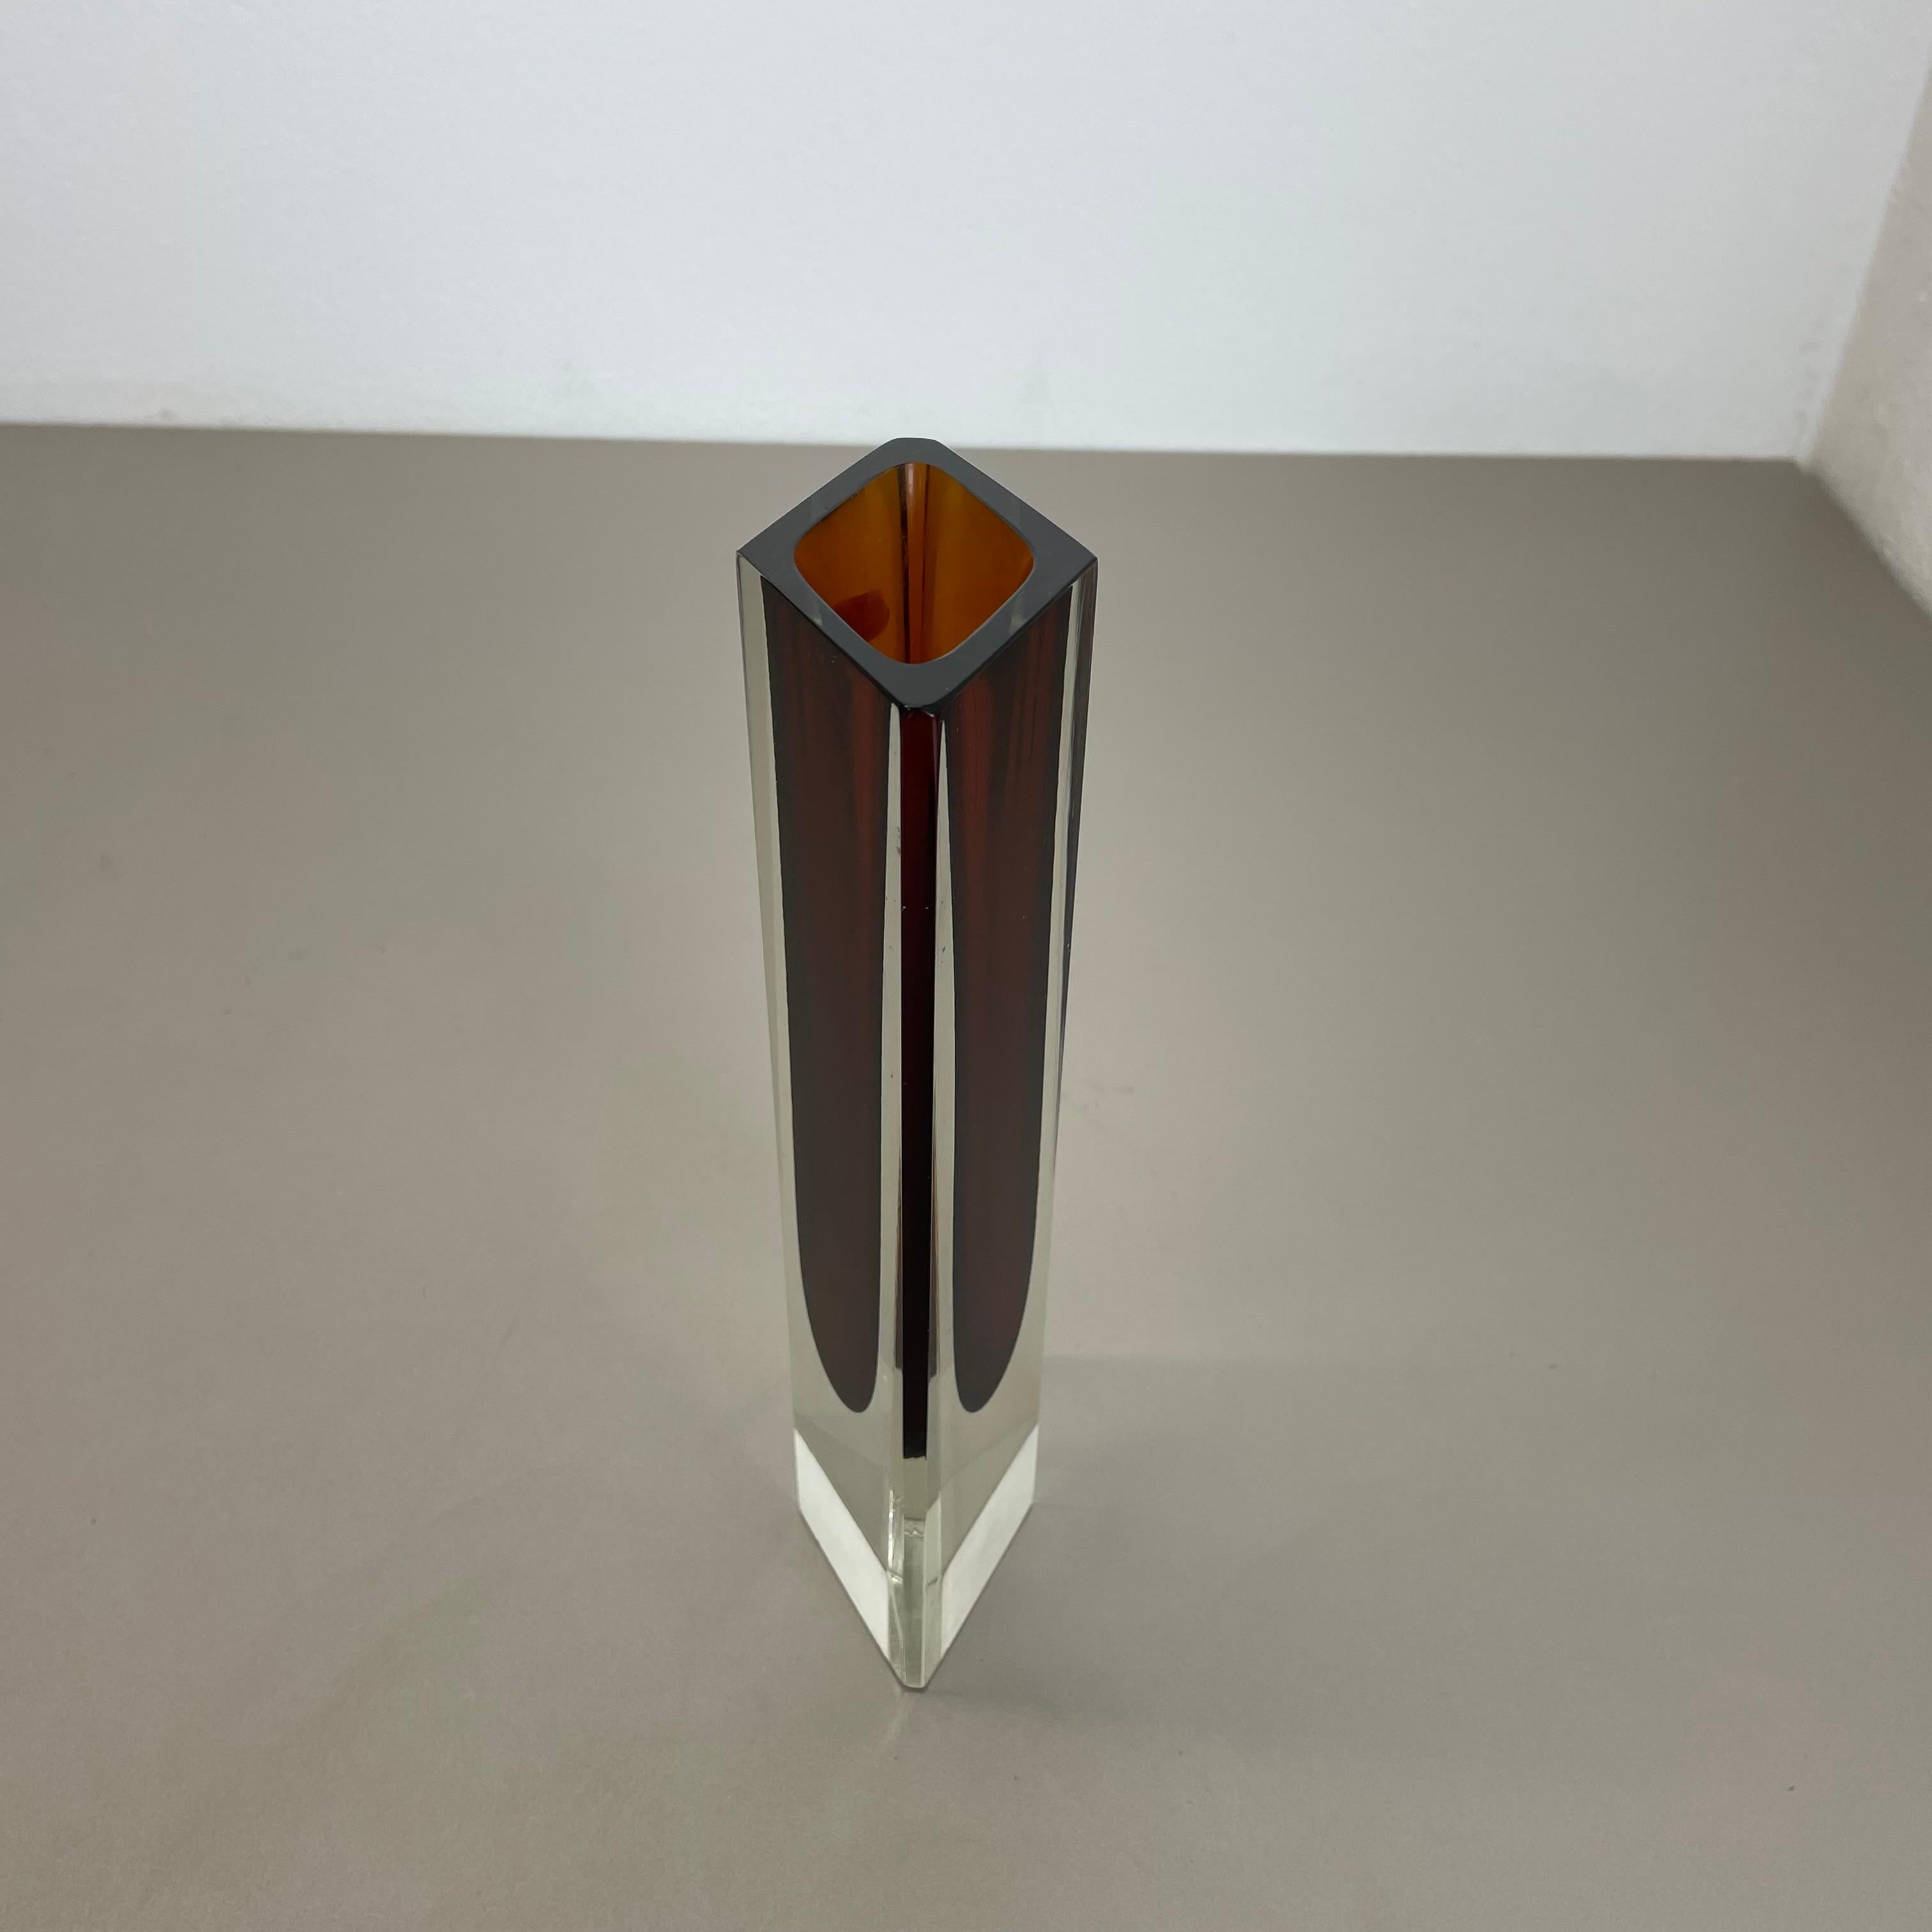 Large 25cm ochre Murano Glass Sommerso Vase, Flavio Poli Attributed, Italy 1970s For Sale 10